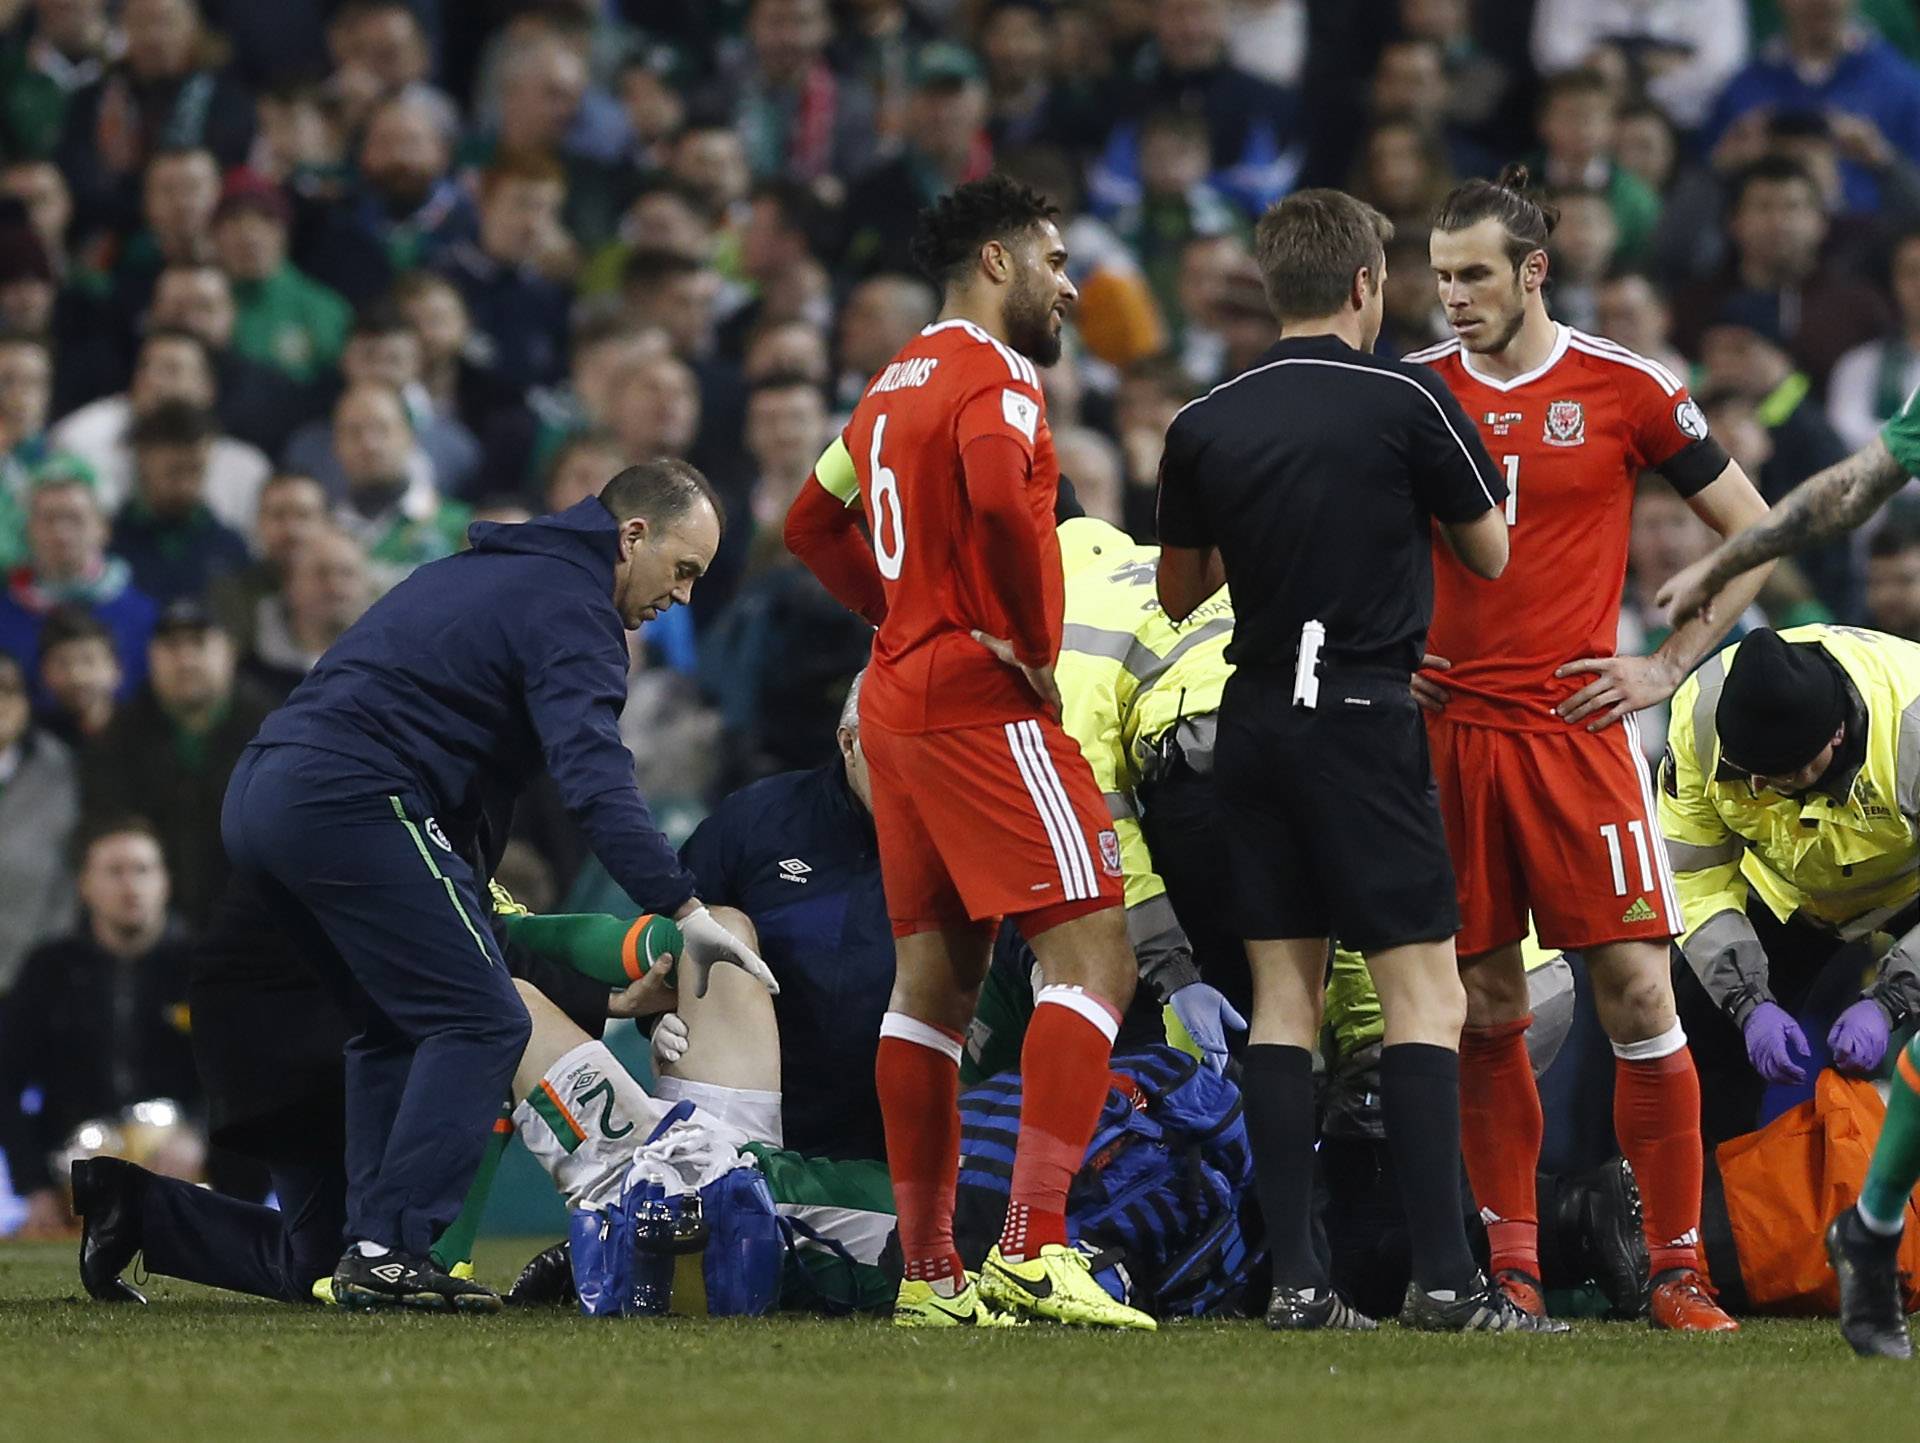 Wales' Gareth Bale and Ashley Williams with referee Nicola Rizzoli as Republic of Ireland's Seamus Coleman receives medical attention